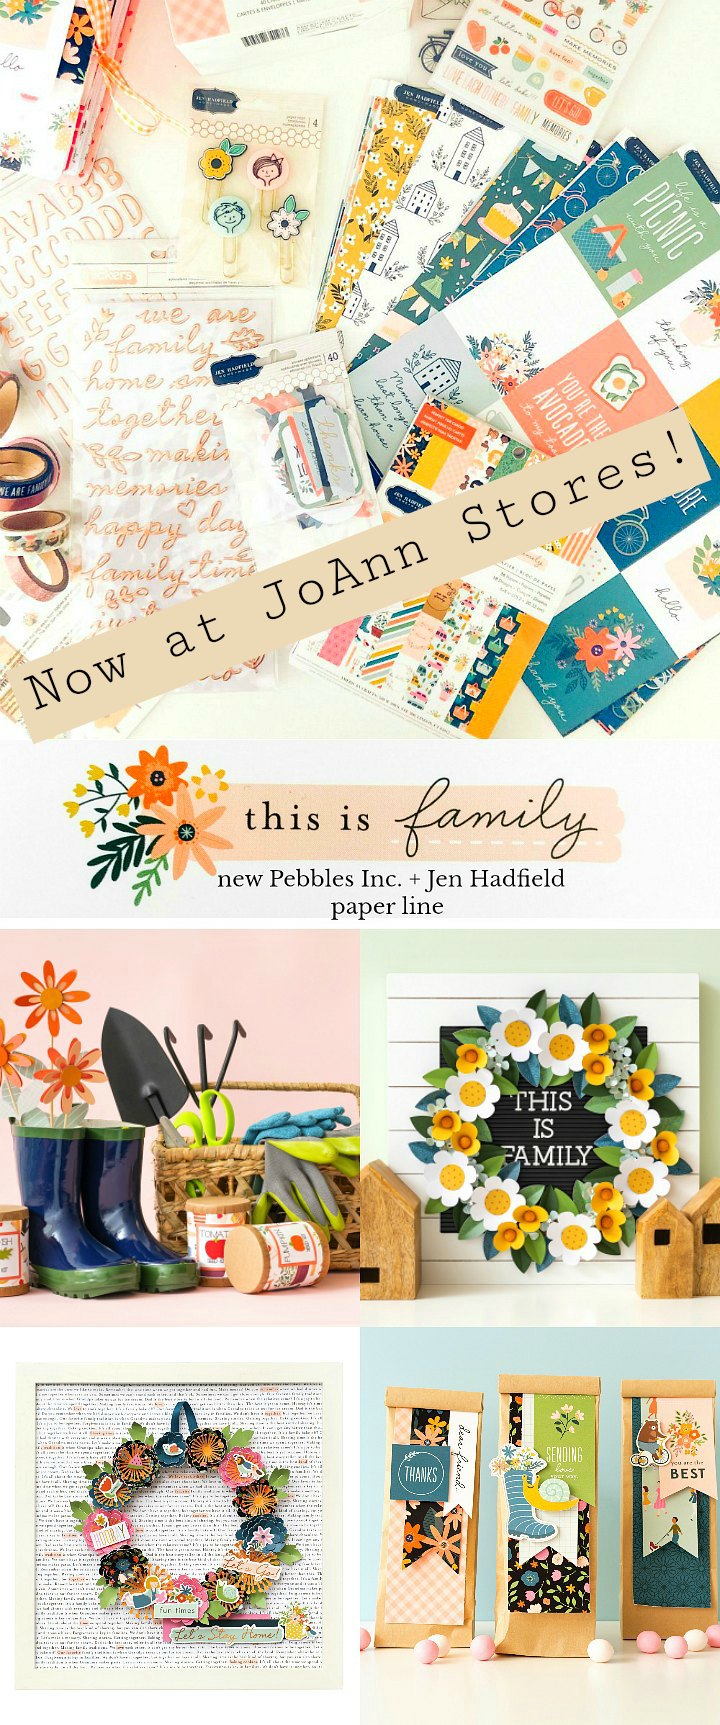 My new paper line, This Is Family, now at JoAnn Stores! This Is Family line celebrates all of the traditions and activities we love doing with the people we love. You can find it now at JoAnn Stores and online!